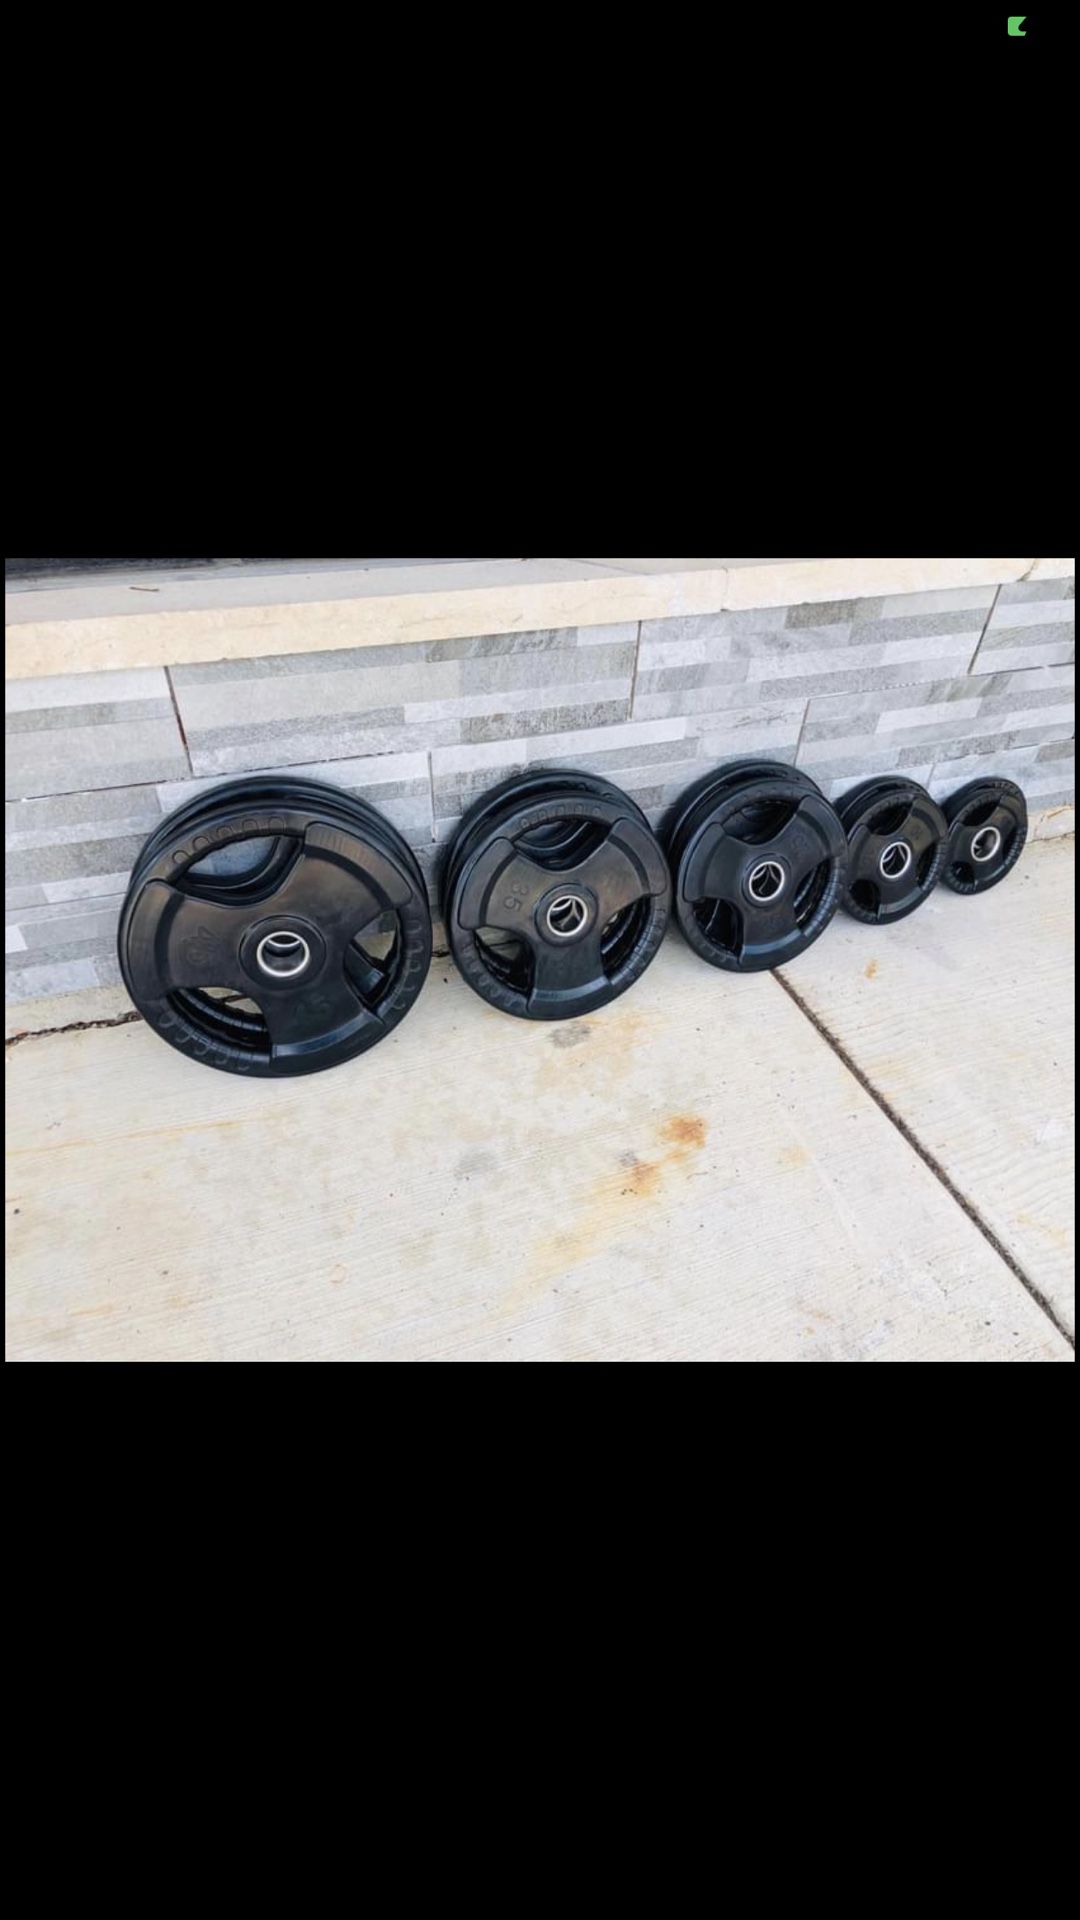 Olympic - Weights - Plates - Rubber Coated - Gym Equipment - Fitness - Home Gym - Workout